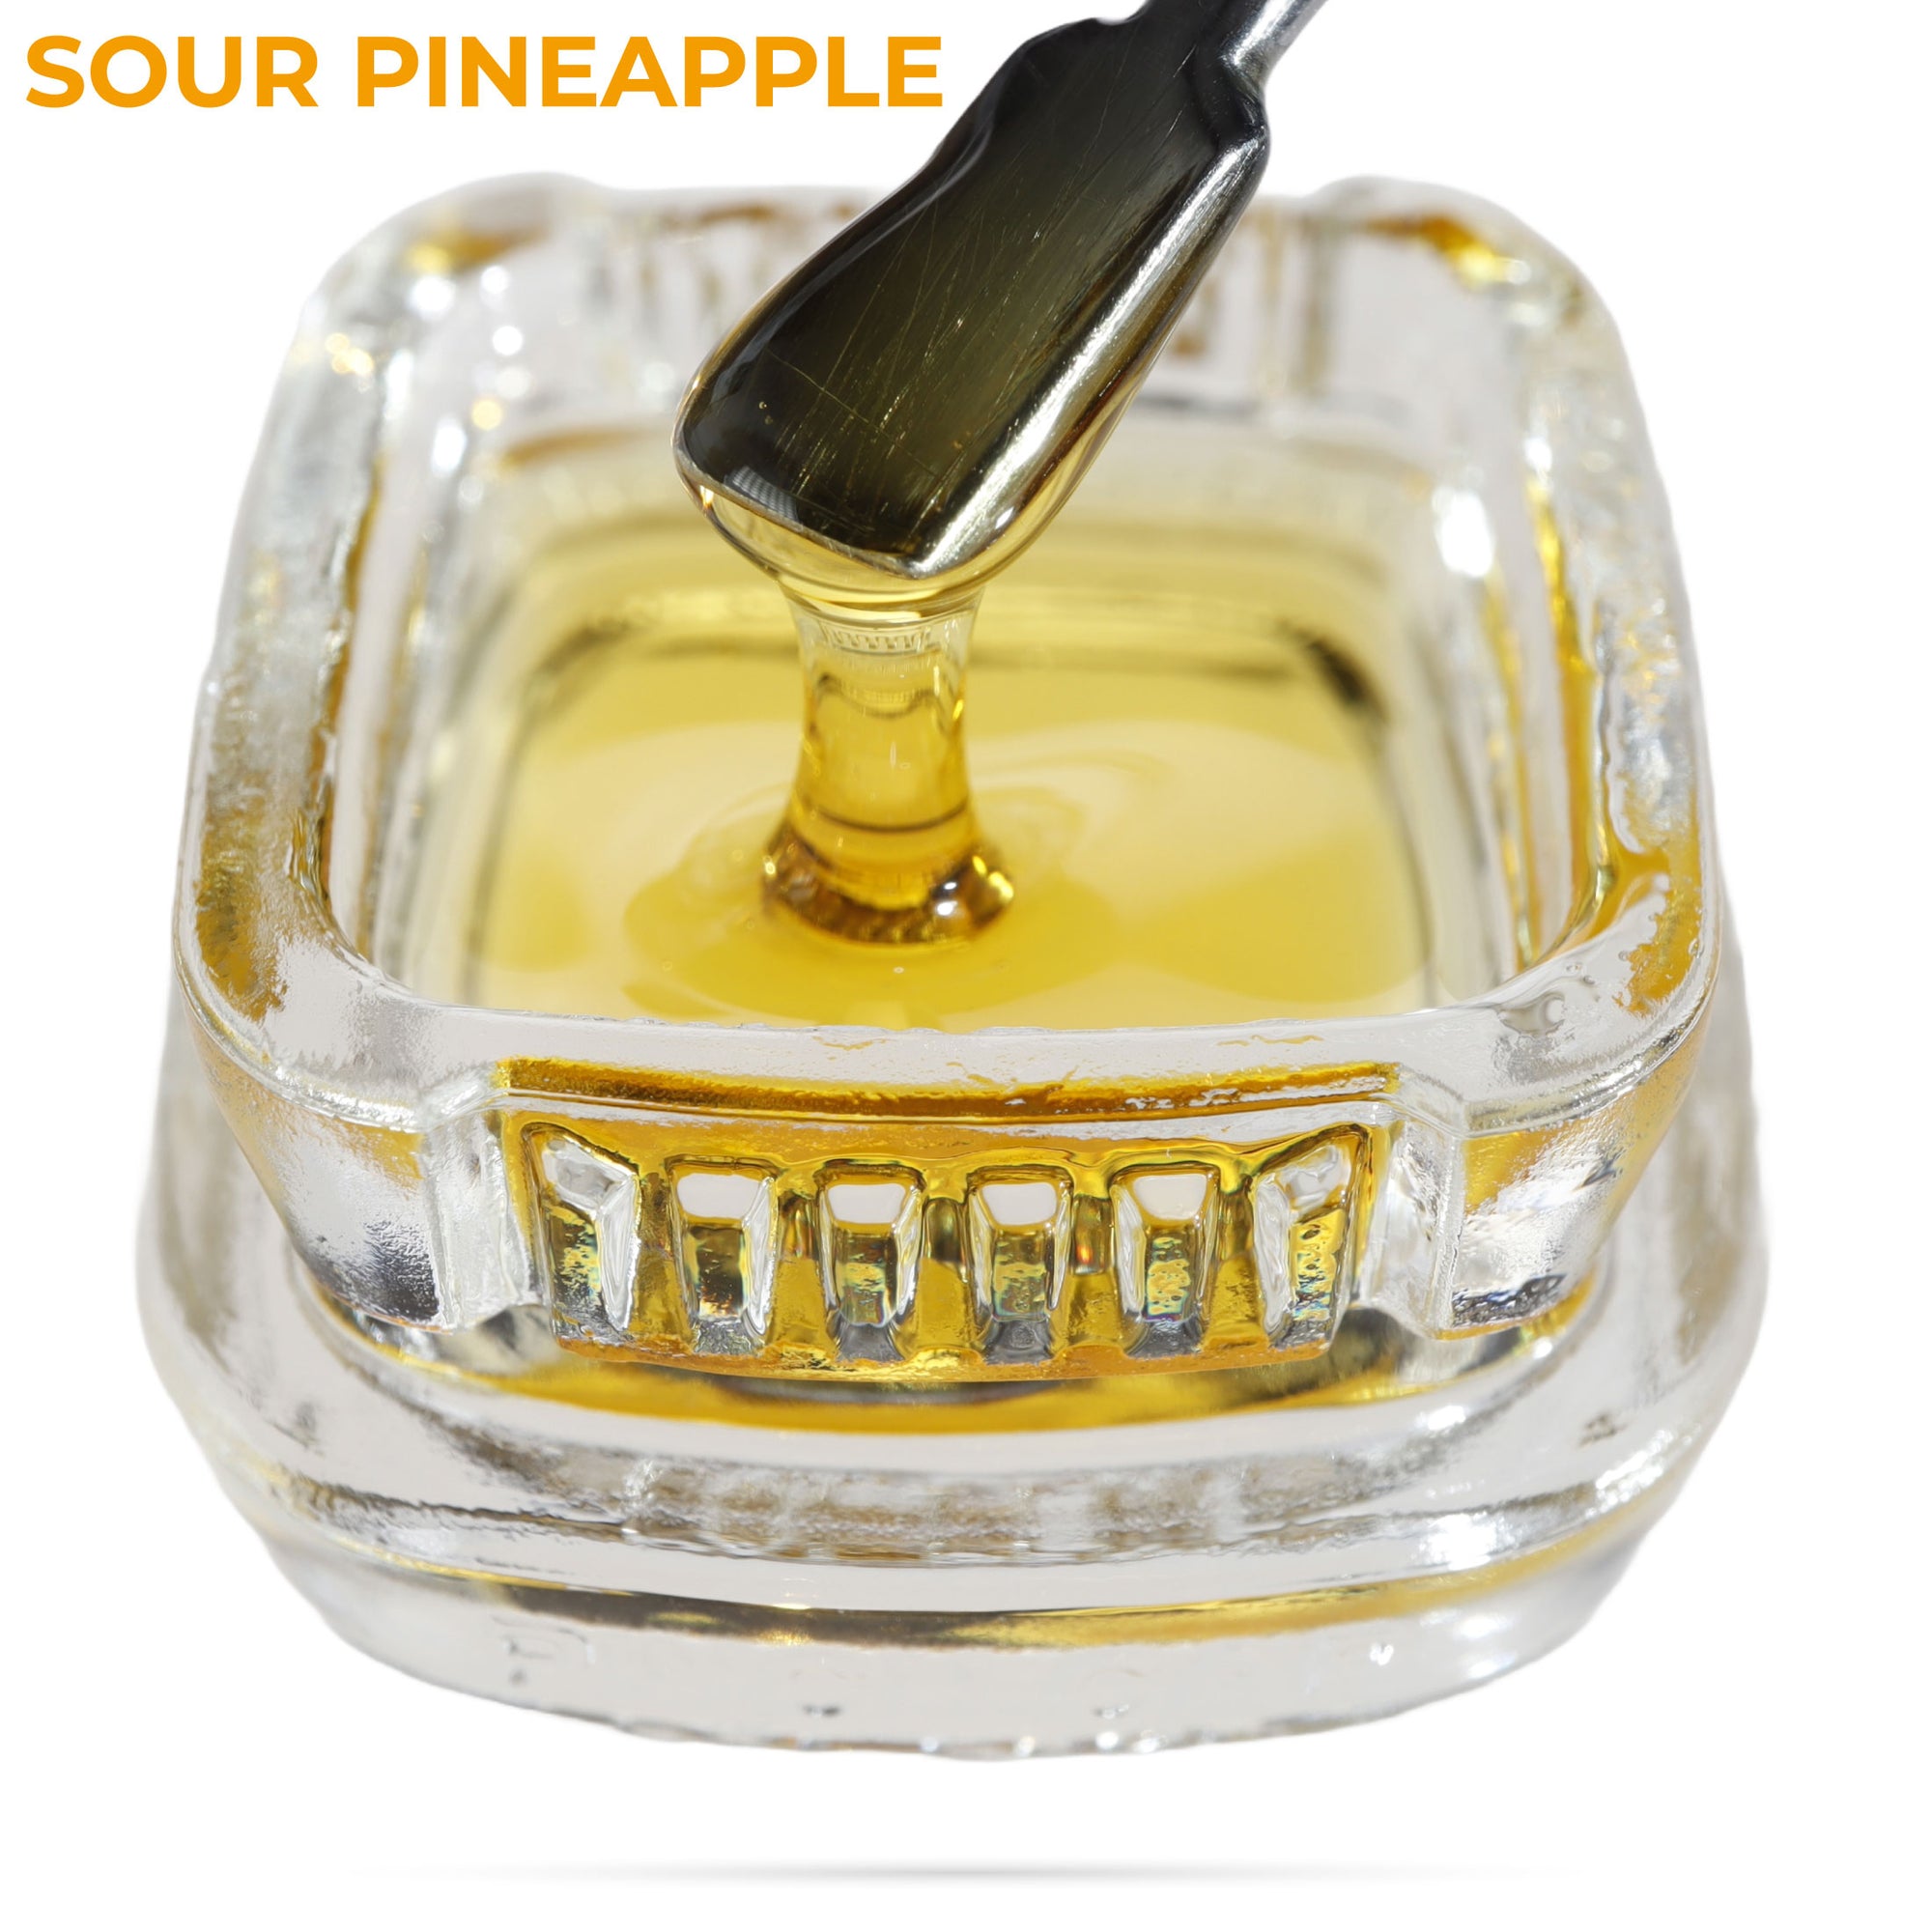 Image of Sour Pineapple CBD Live Resin dripping from a dab tool into a calyx container.